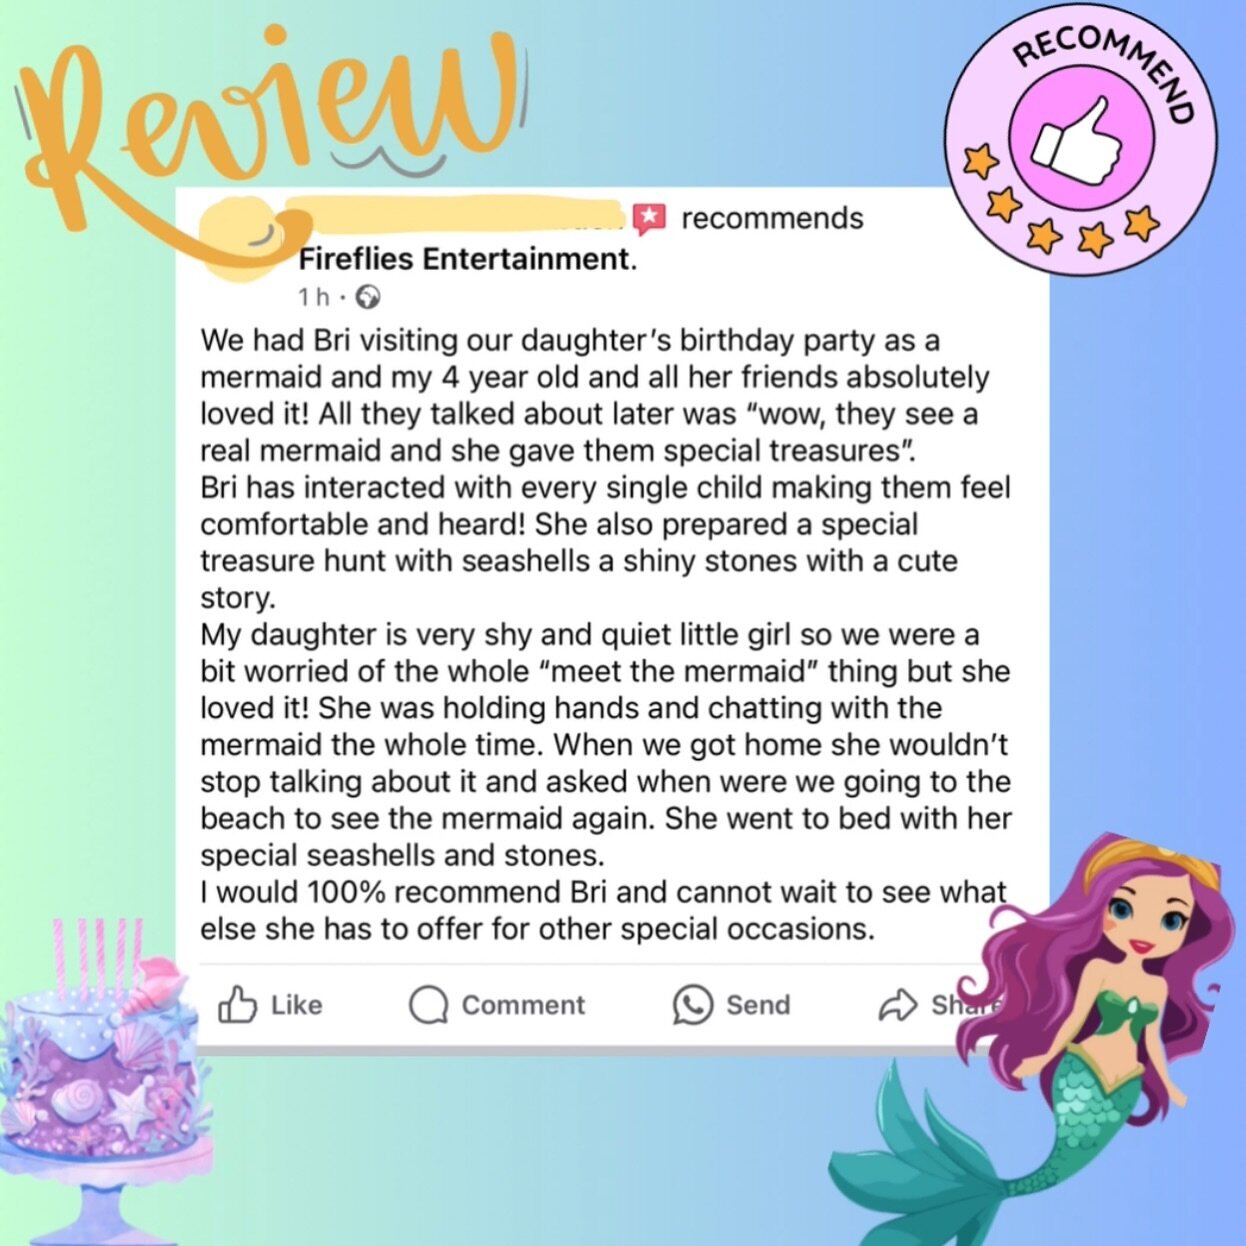 loved receiving our first review and hearing that the mermaid visit on Sunday made such an impact 🧜🏻&zwj;♀️ 🥹 we had so much fun and sounds like all the children did too 💛

exactly why I&rsquo;ve opened this business, I absolutely love getting to